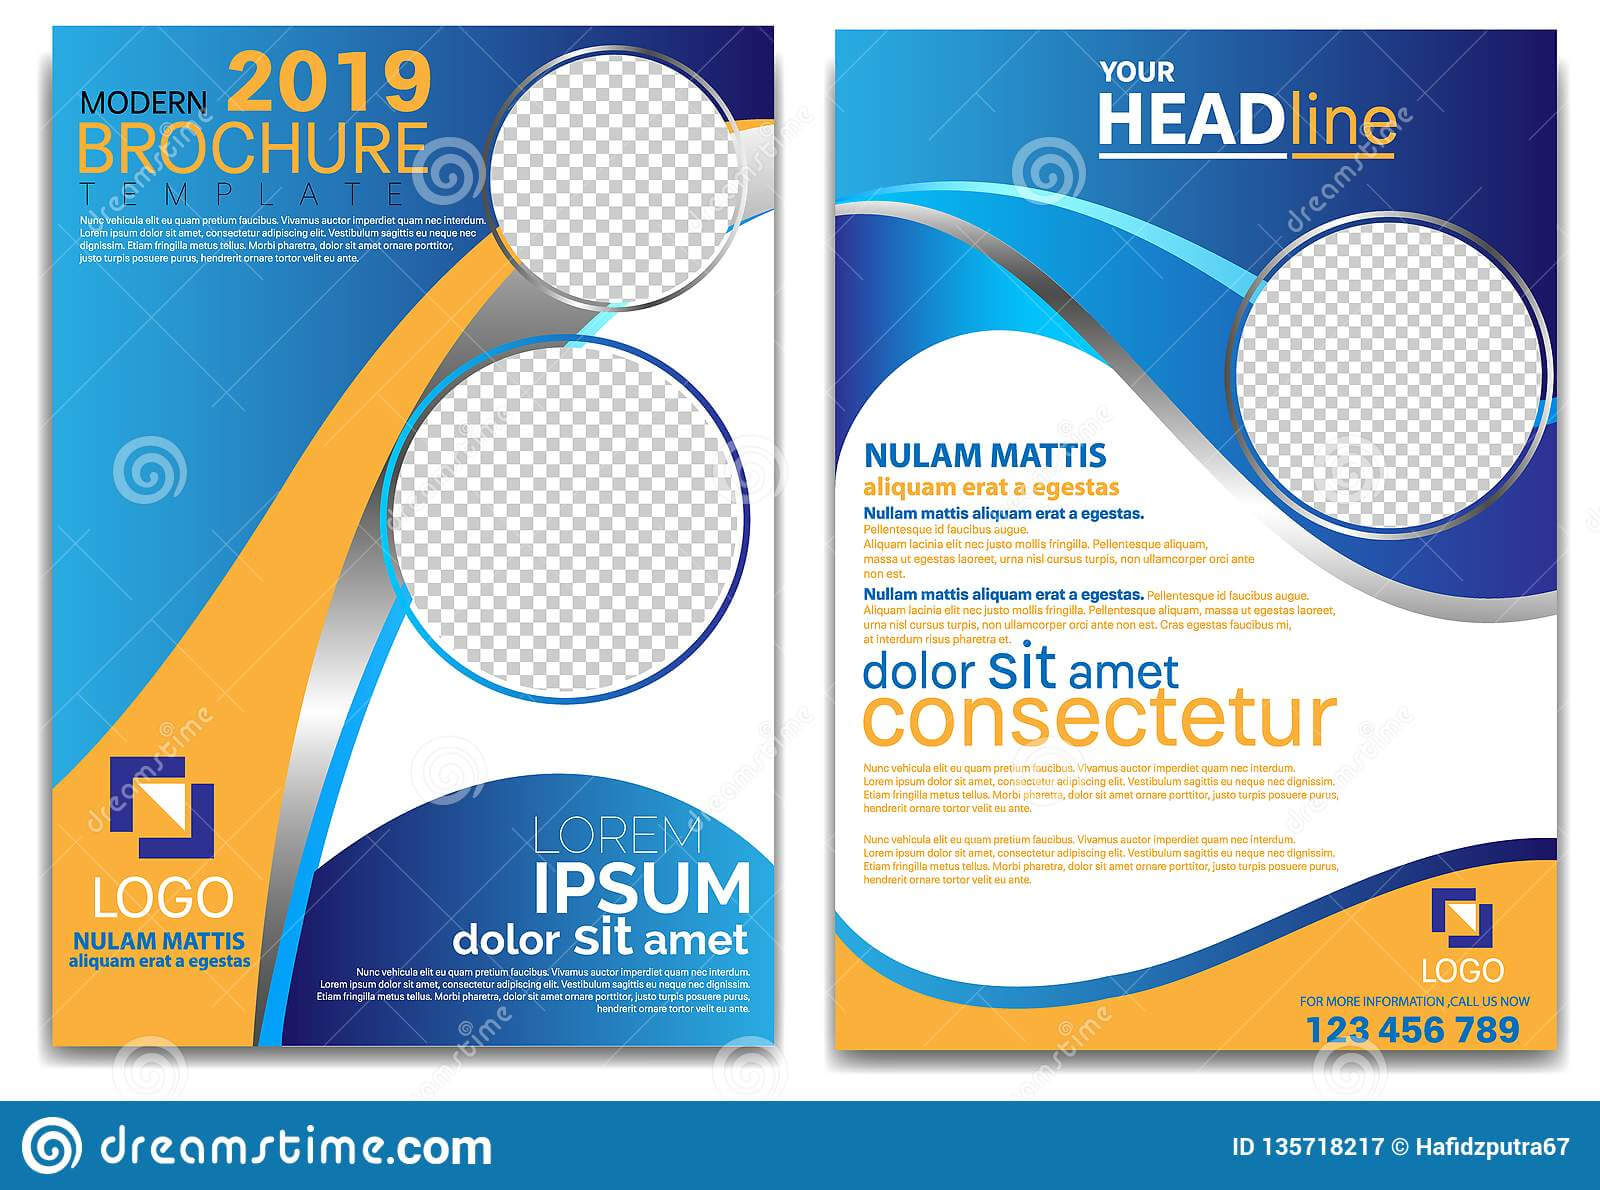 Modern Brochure Template 2019 And Professional Brochure Within Professional Brochure Design Templates